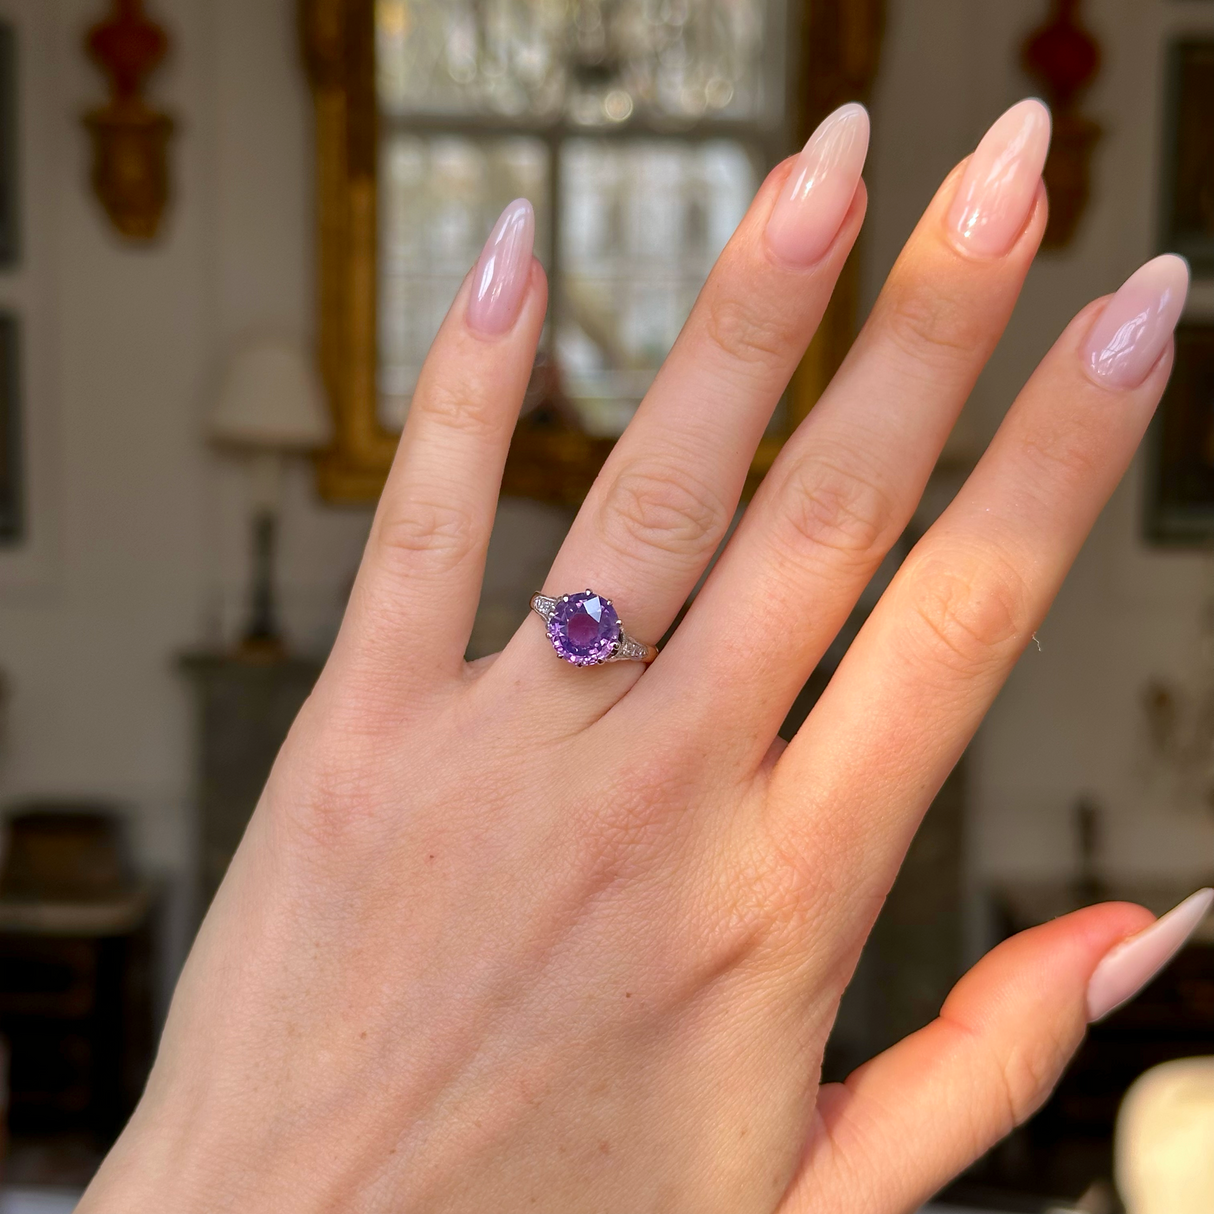 Purple sapphire engagement ring, rear view.